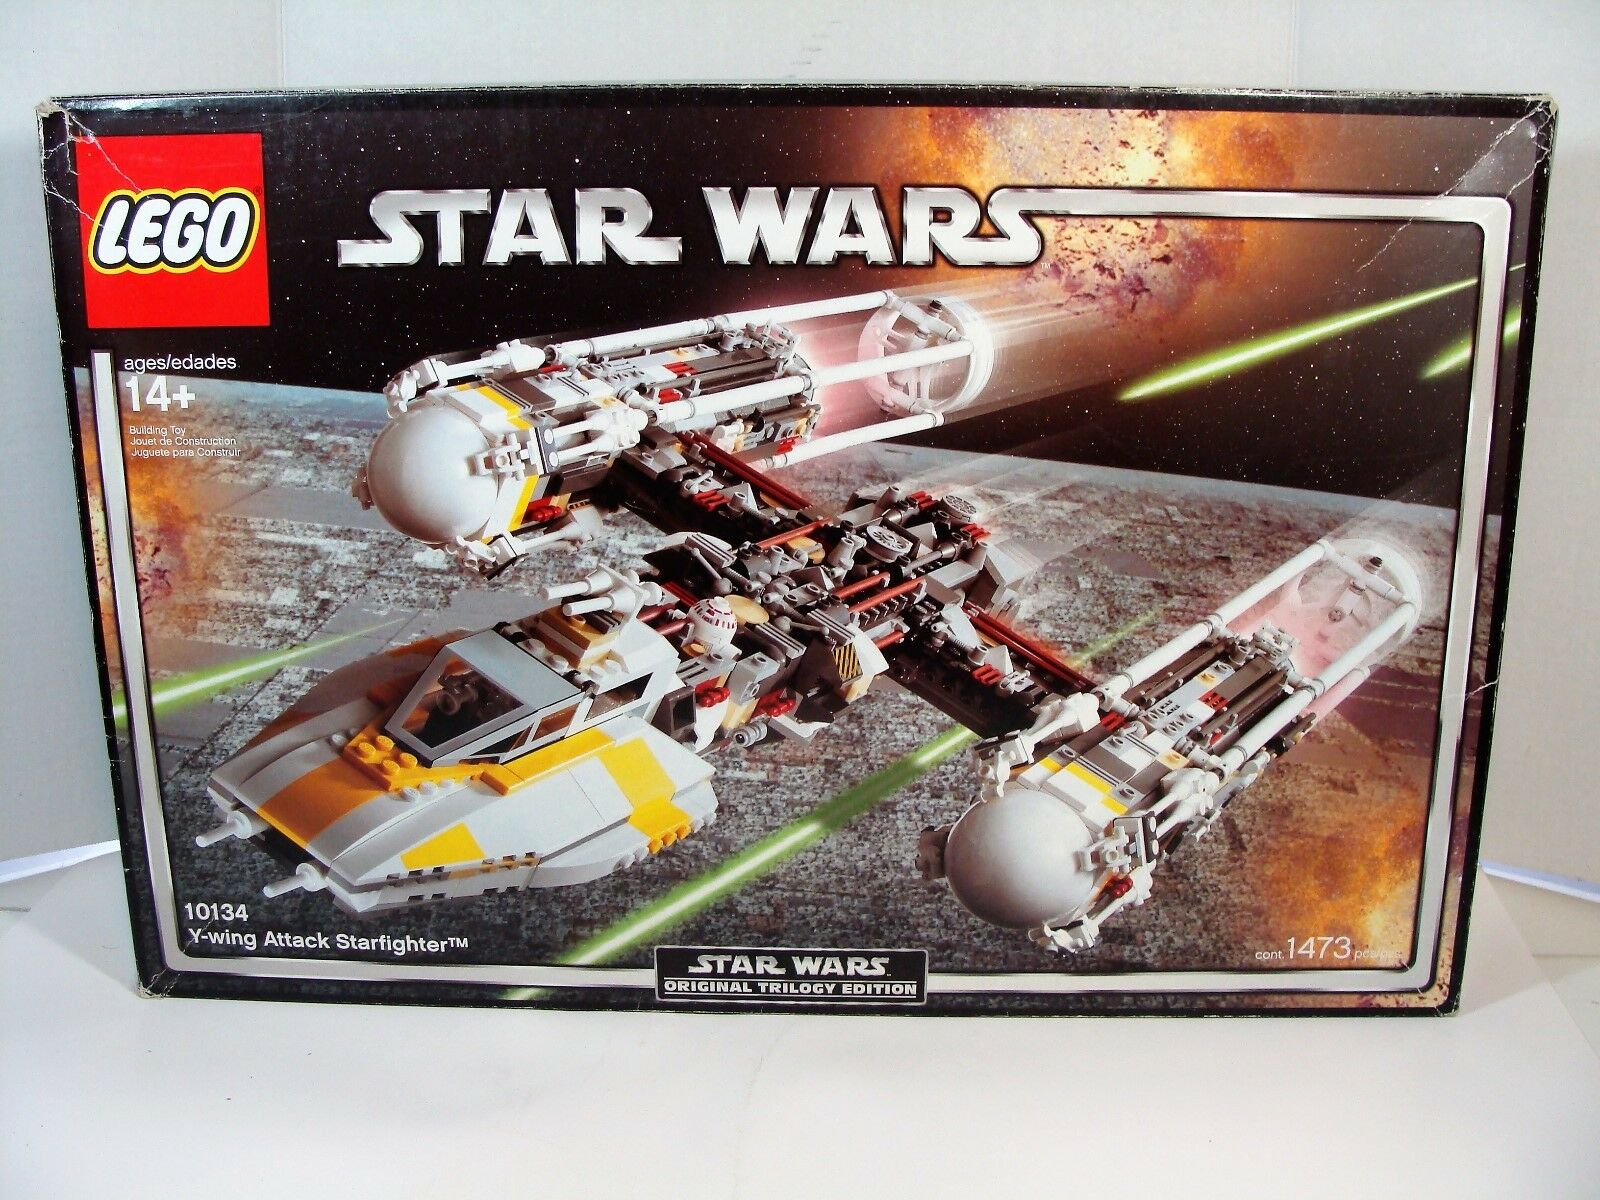 Y-wing Attack Starfighter Ultimate Collector’s Series 10134